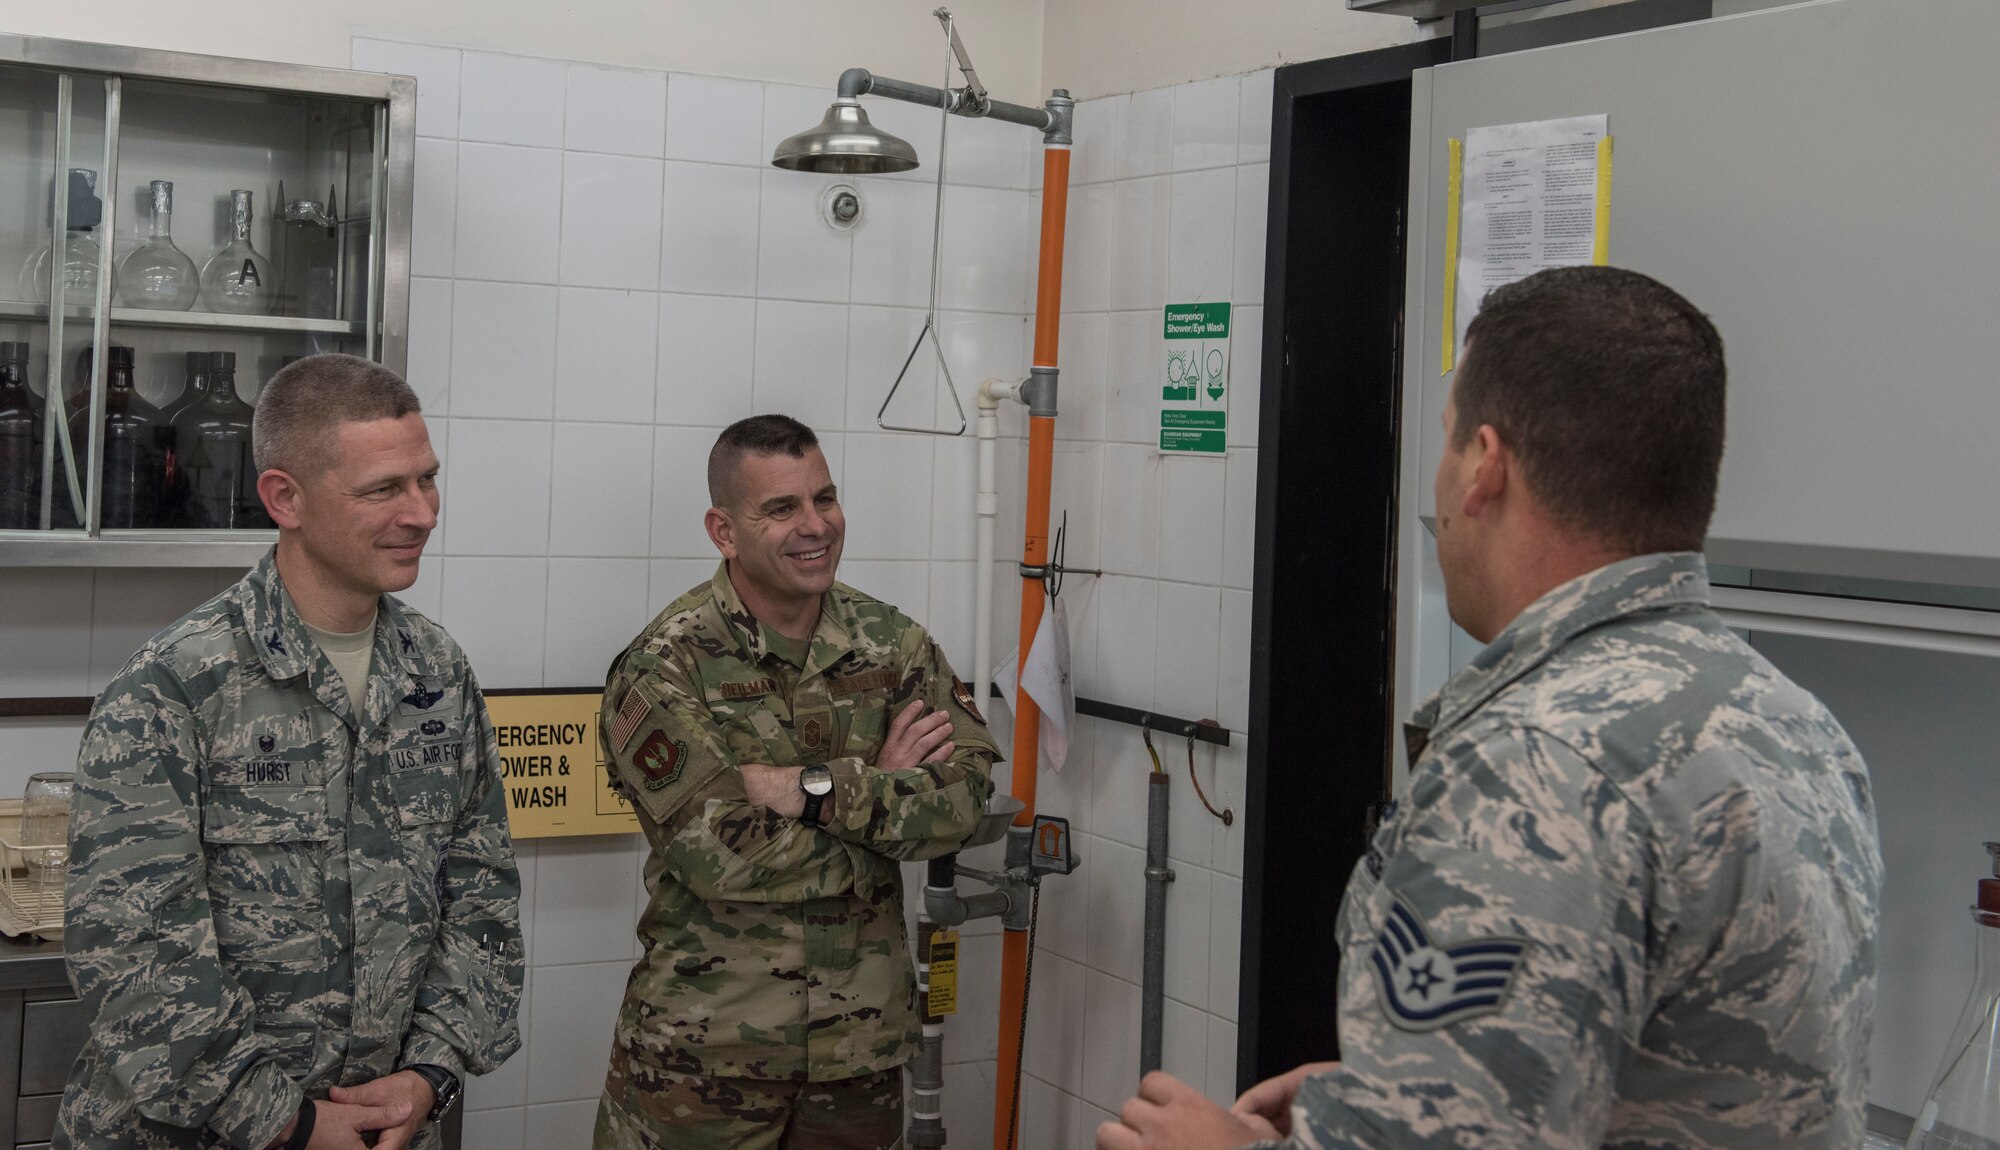 39th Logistics Readiness Squadron fuels laboratory NCOIC briefs the 39th Air Base Wing commander and command chief.